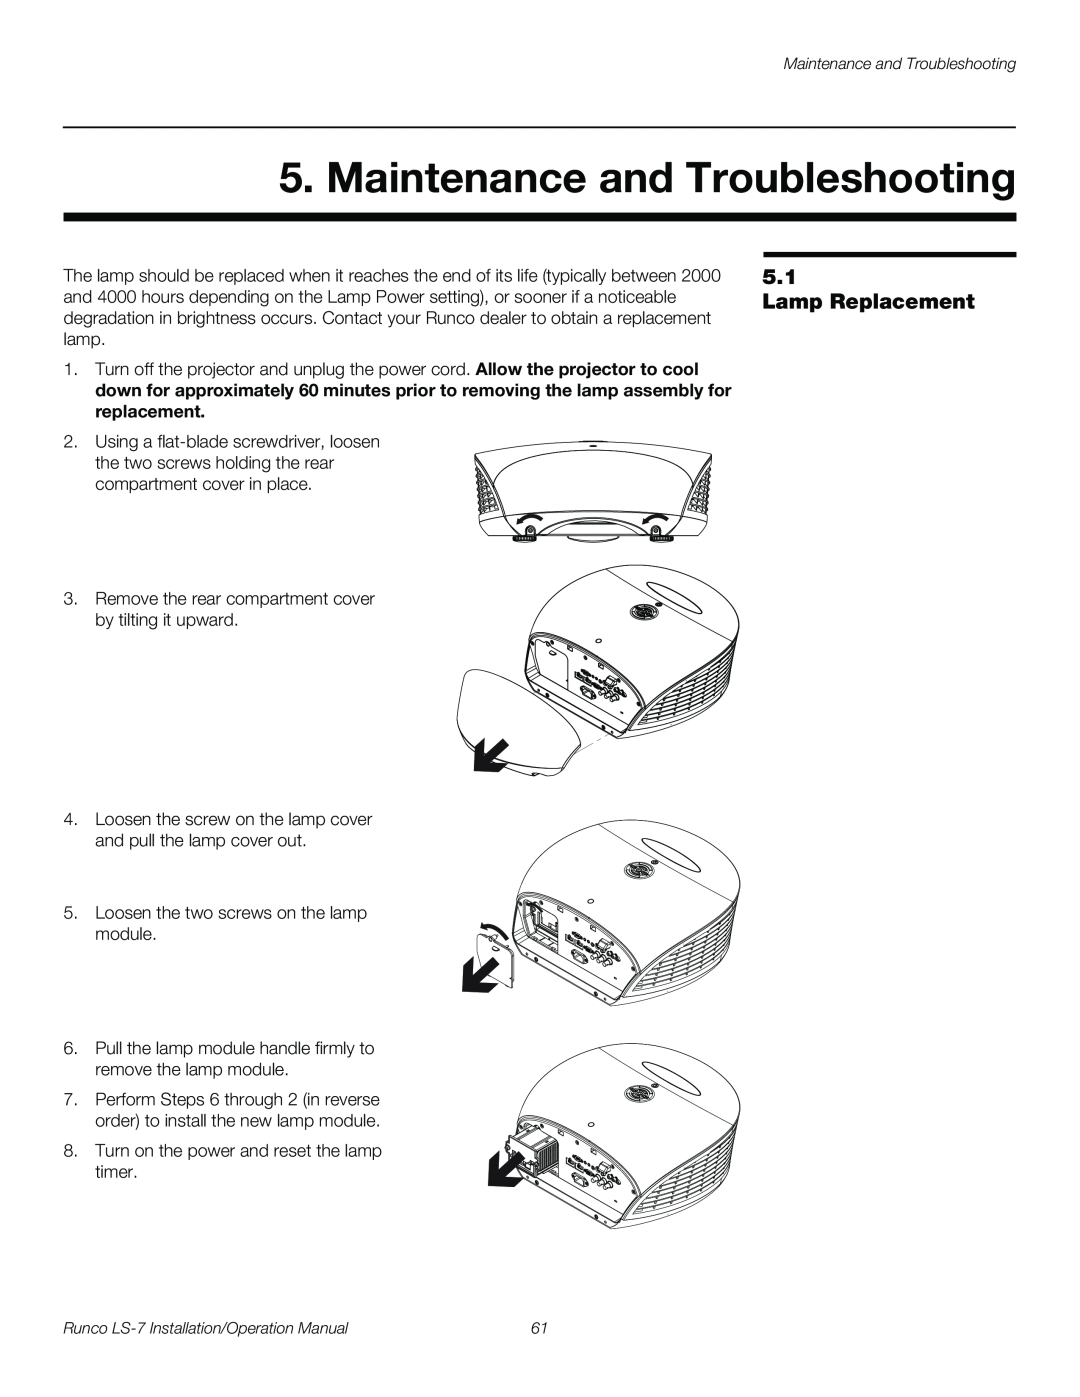 Runco LS-7 operation manual Maintenance and Troubleshooting, Lamp Replacement 